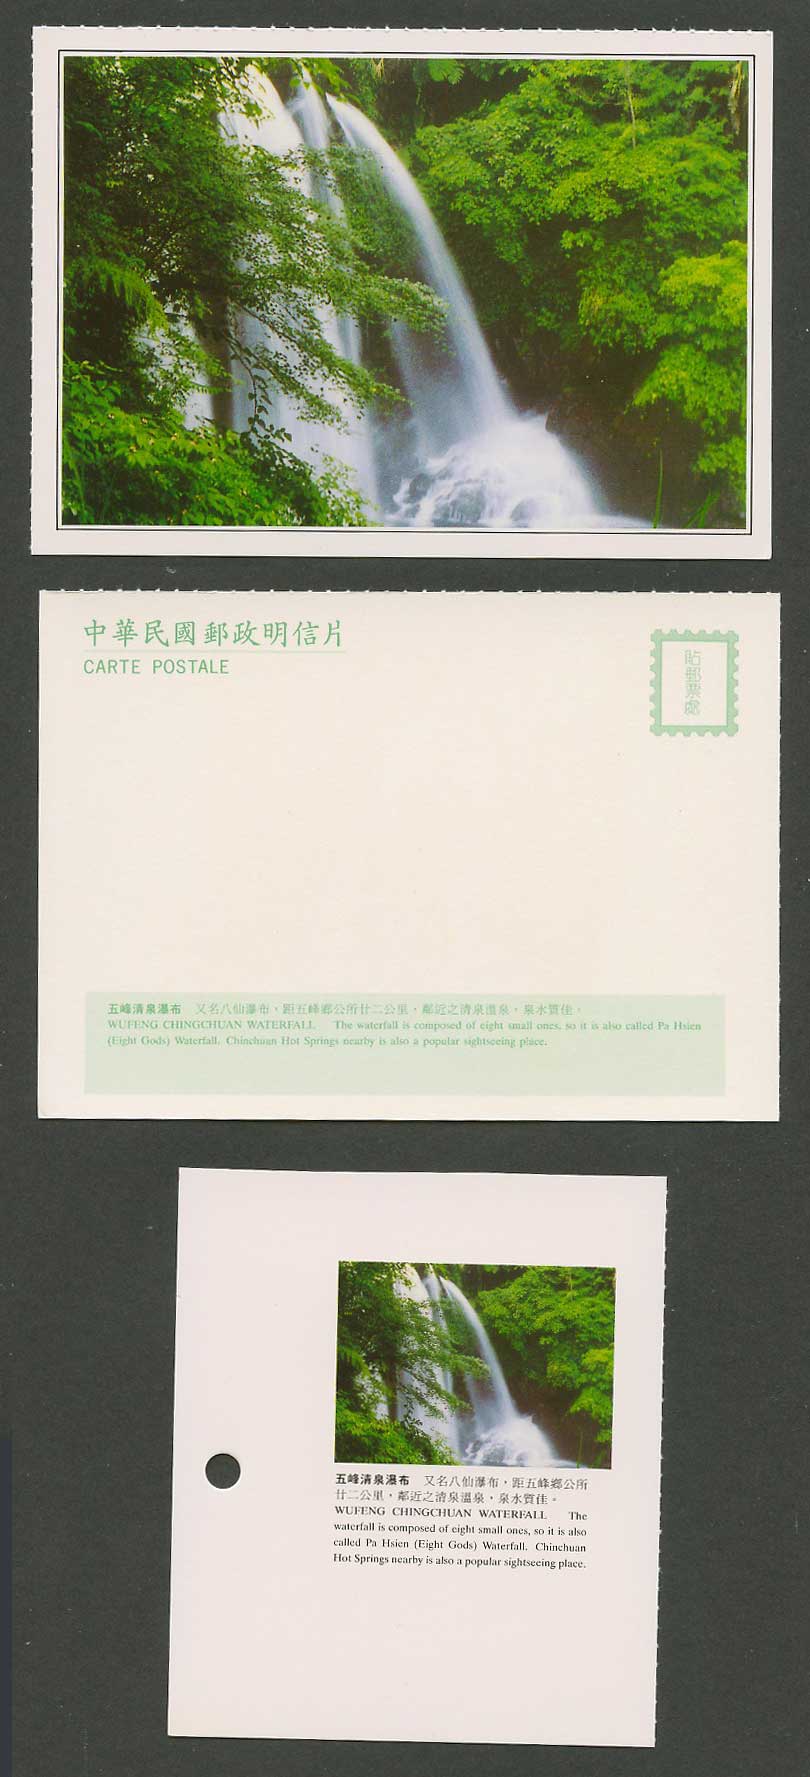 Taiwan Formosa China Postcard Wufeng Chingchuan Waterfall Eight Gods 五峰清泉瀑布 八仙瀑布